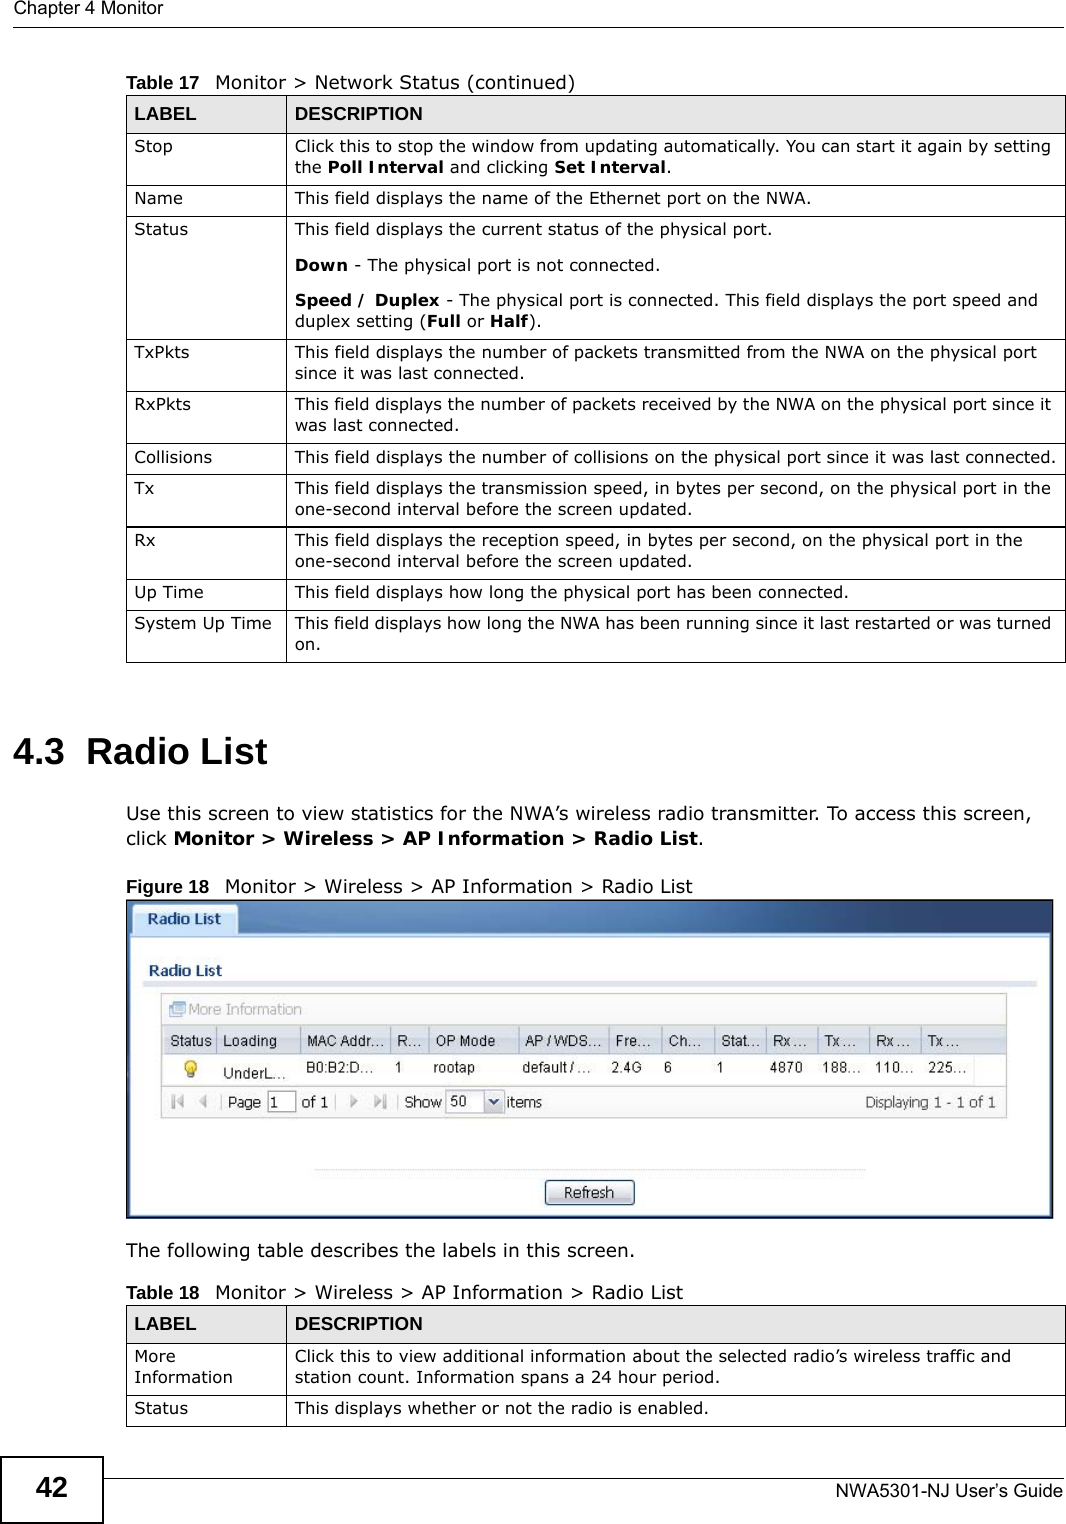 Chapter 4 MonitorNWA5301-NJ User’s Guide424.3  Radio List Use this screen to view statistics for the NWA’s wireless radio transmitter. To access this screen, click Monitor &gt; Wireless &gt; AP Information &gt; Radio List.Figure 18   Monitor &gt; Wireless &gt; AP Information &gt; Radio List    The following table describes the labels in this screen.  Stop Click this to stop the window from updating automatically. You can start it again by setting the Poll Interval and clicking Set Interval.Name This field displays the name of the Ethernet port on the NWA.Status This field displays the current status of the physical port. Down - The physical port is not connected.Speed / Duplex - The physical port is connected. This field displays the port speed and duplex setting (Full or Half).TxPkts This field displays the number of packets transmitted from the NWA on the physical port since it was last connected.RxPkts This field displays the number of packets received by the NWA on the physical port since it was last connected.Collisions This field displays the number of collisions on the physical port since it was last connected.Tx This field displays the transmission speed, in bytes per second, on the physical port in the one-second interval before the screen updated.Rx This field displays the reception speed, in bytes per second, on the physical port in the one-second interval before the screen updated.Up Time This field displays how long the physical port has been connected.System Up Time This field displays how long the NWA has been running since it last restarted or was turned on.Table 17   Monitor &gt; Network Status (continued)LABEL DESCRIPTIONTable 18   Monitor &gt; Wireless &gt; AP Information &gt; Radio ListLABEL DESCRIPTIONMore InformationClick this to view additional information about the selected radio’s wireless traffic and station count. Information spans a 24 hour period.Status This displays whether or not the radio is enabled.